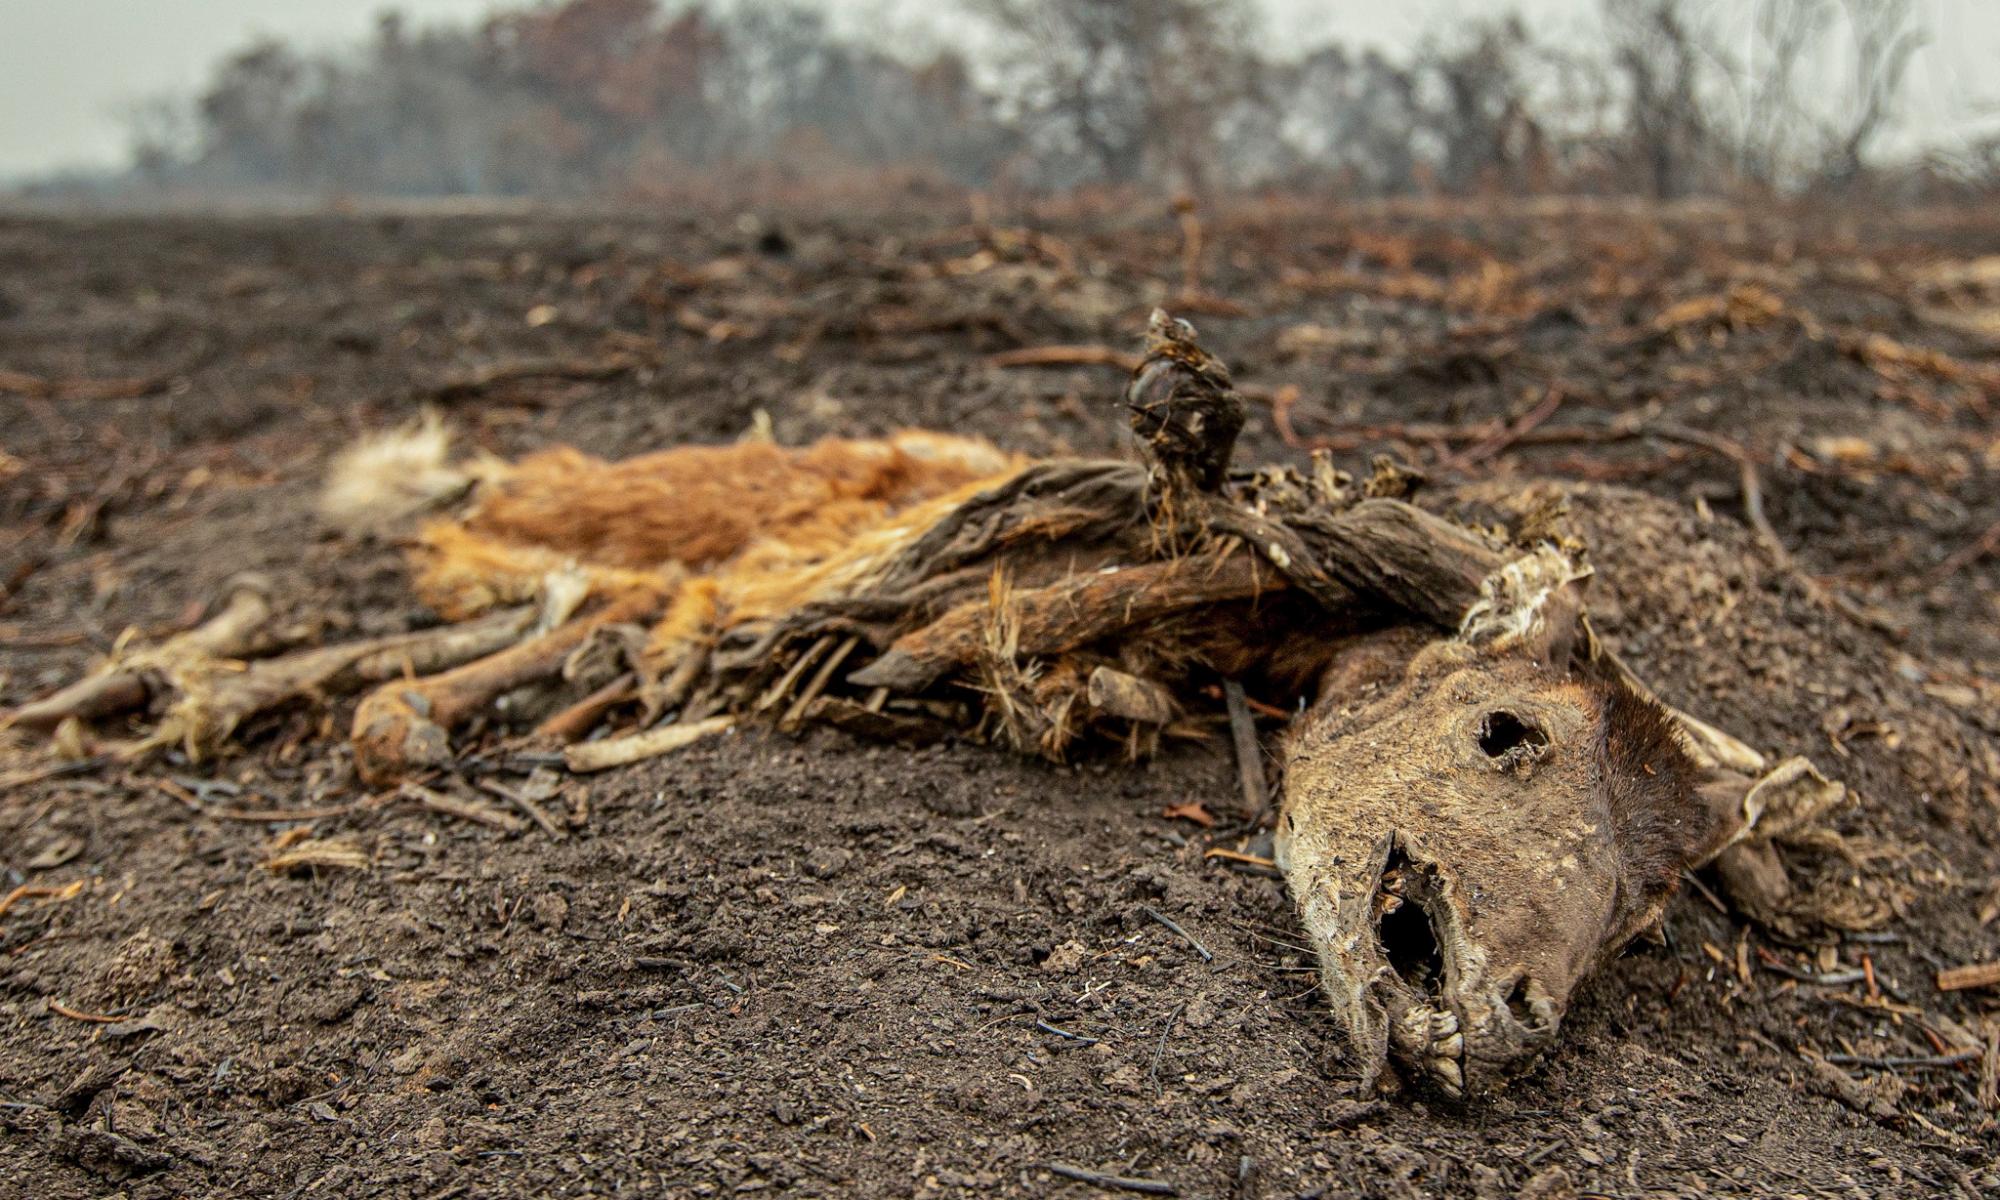 Brazilian wetlands fires started by humans and worsened by drought